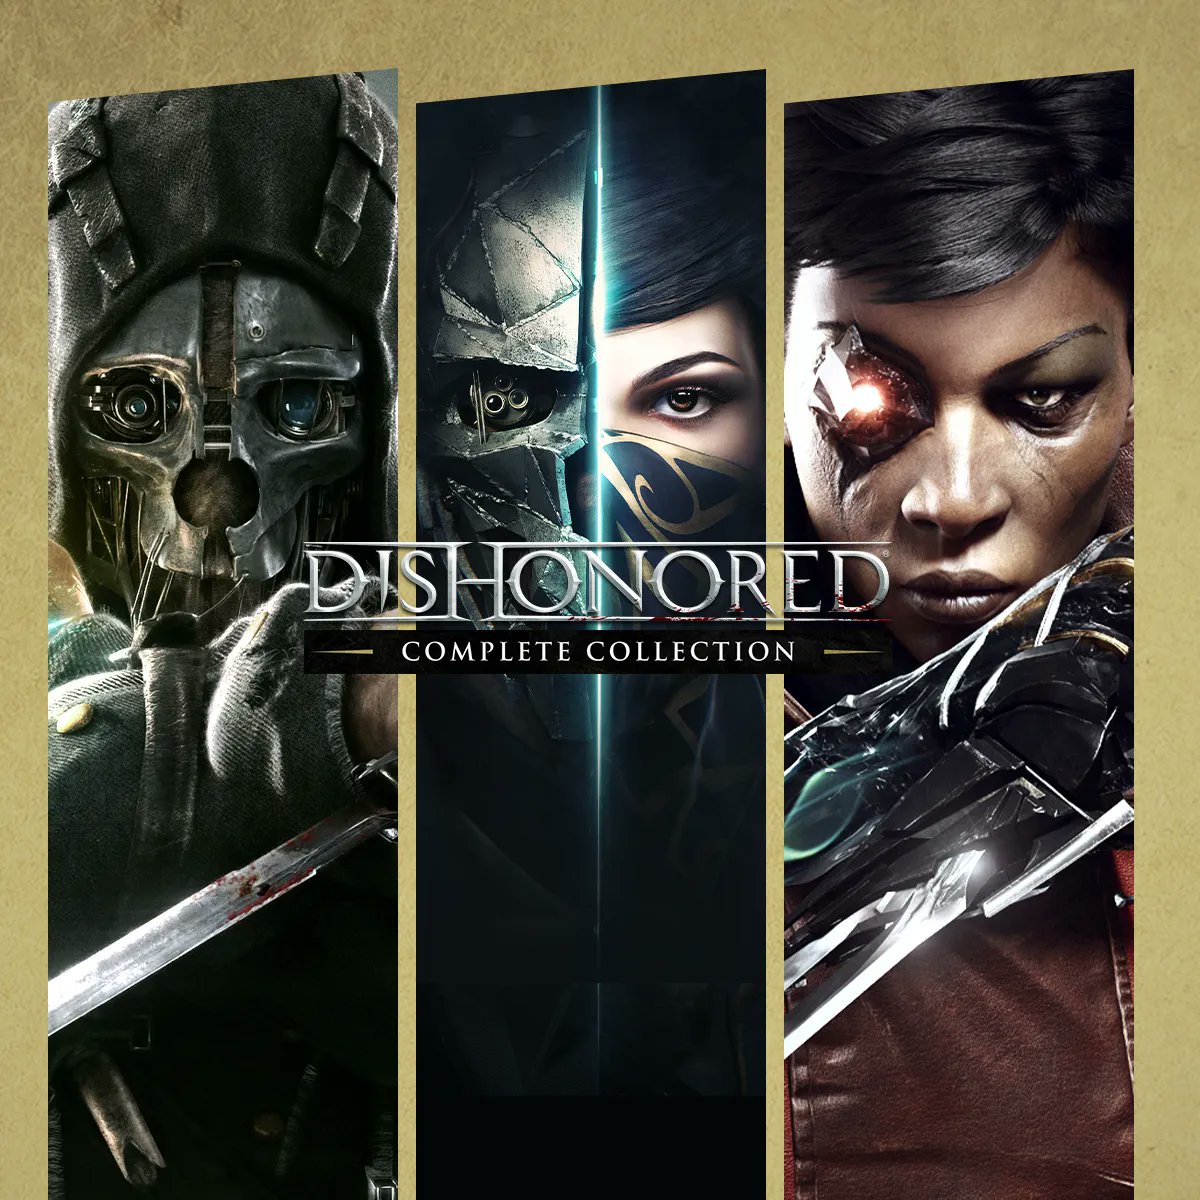 80% Dishonored 2 on